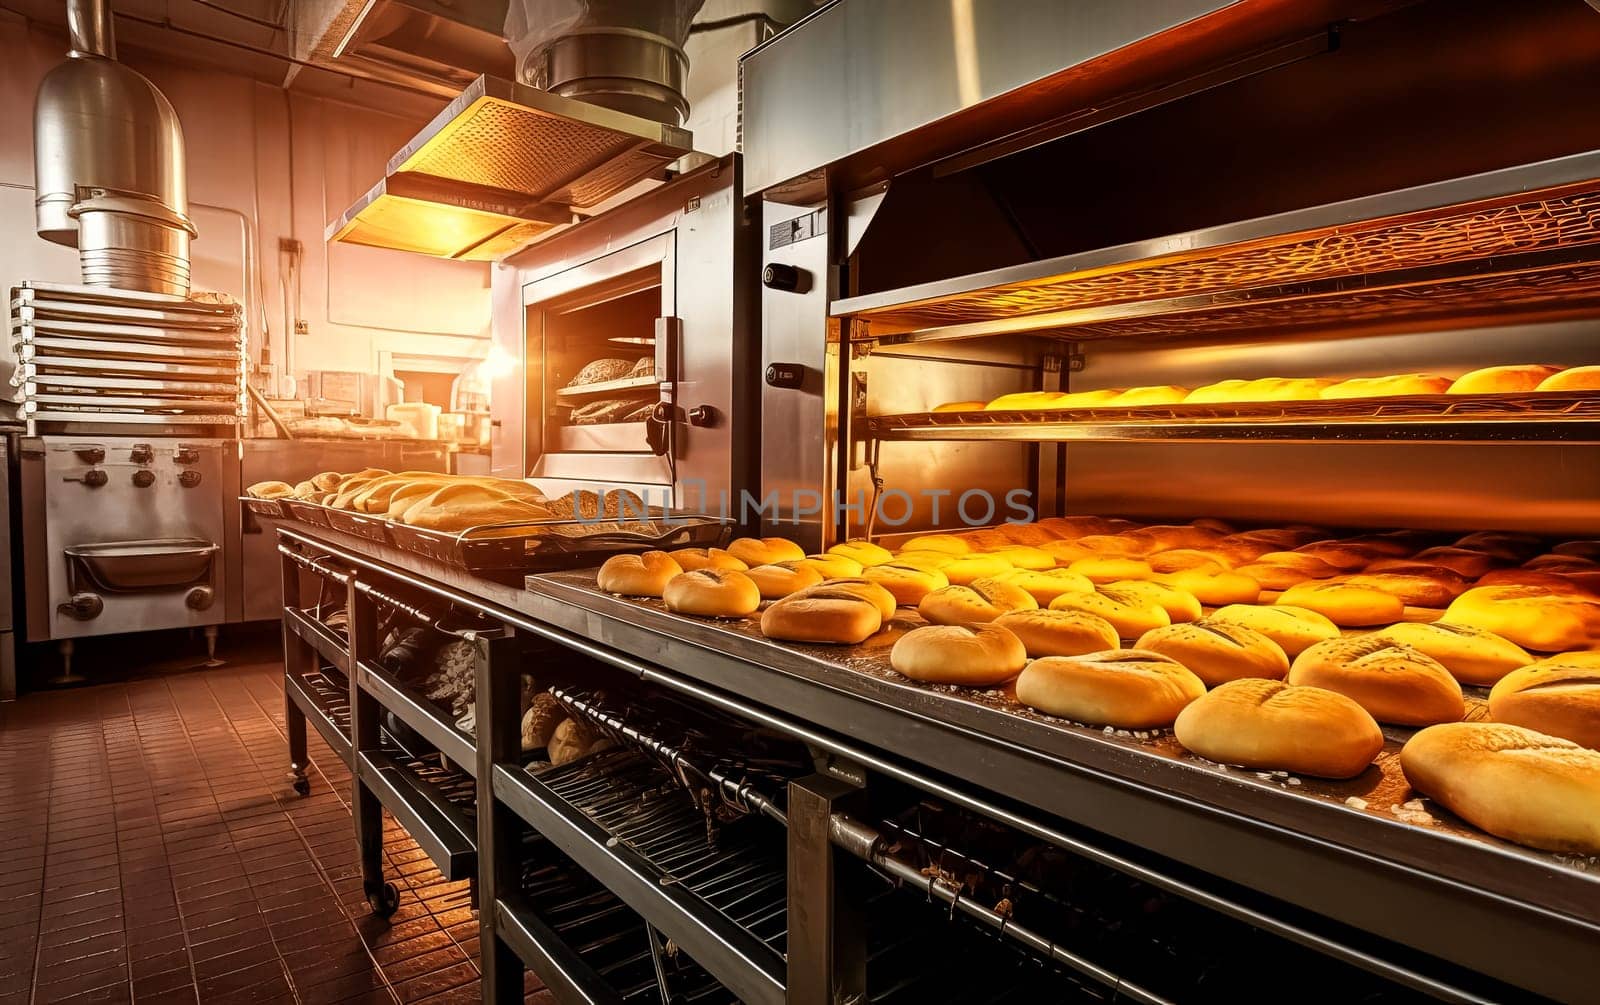 Step into the heart of the bakery, capturing the essence of bread and buns baking. A tantalizing view inside, showcasing the artistry and warmth of the baking process.